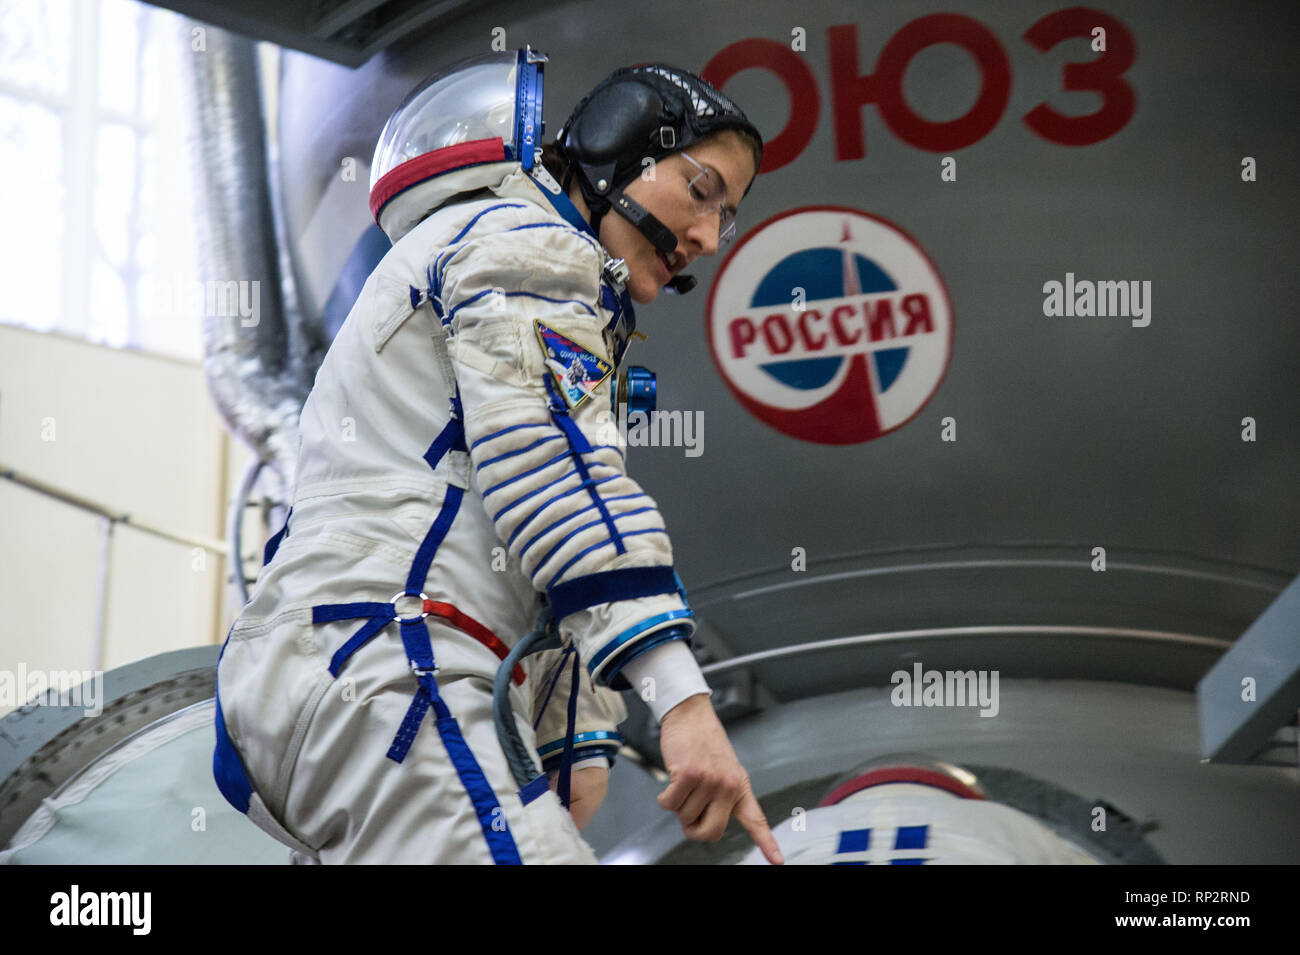 Star City, Russia. 20th Feb, 2019. International Space Station Expedition 59 crew member Christina Koch of NASA boards the Soyuz spacecraft simulator February 20, 2019 at Star City, Russia. The crew of Christina Koch, Alexey Ovchinin and Nick Hague will launch March 14th from the Baikonur Cosmodrome in Kazakhstan on the Soyuz MS-12 spacecraft for a six-and-a-half month mission on the International Space Station. Credit: Planetpix/Alamy Live News Stock Photo